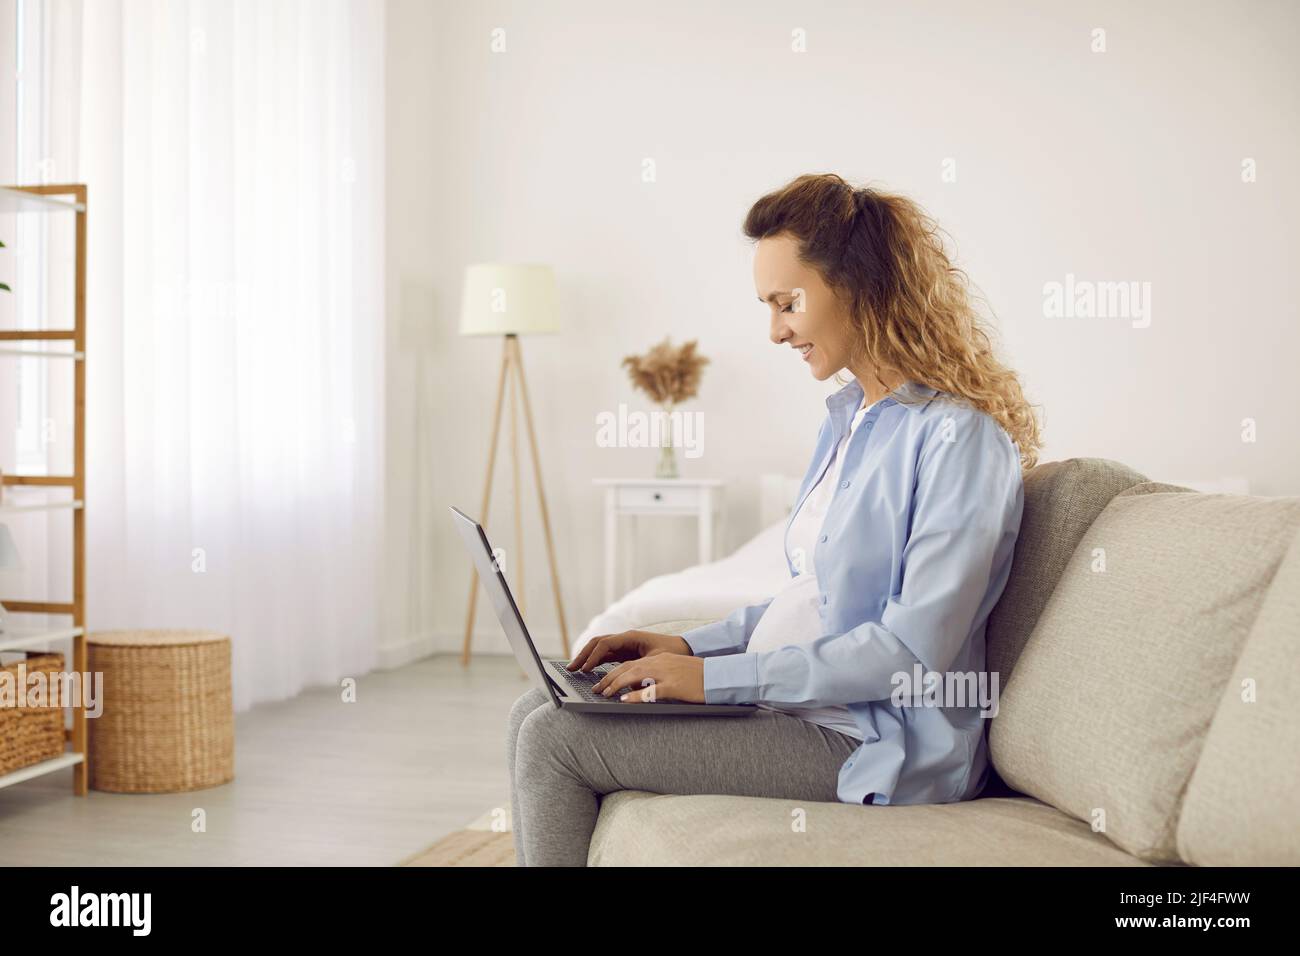 Smiling woman working online on computer at home Stock Photo